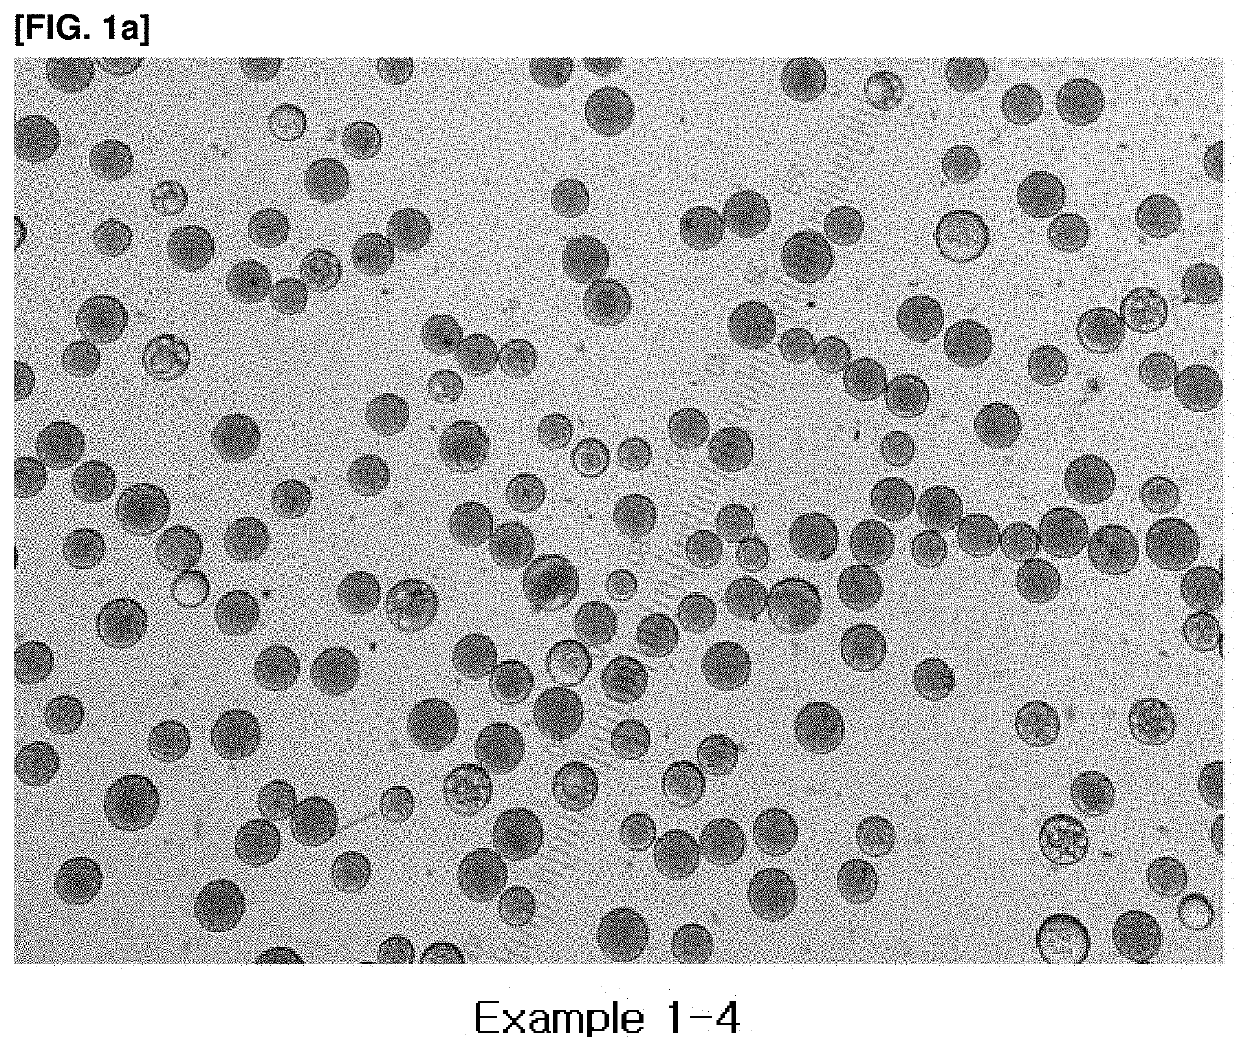 Vitamin c-containing polycaprolactone microsphere filler and preparation method therefor